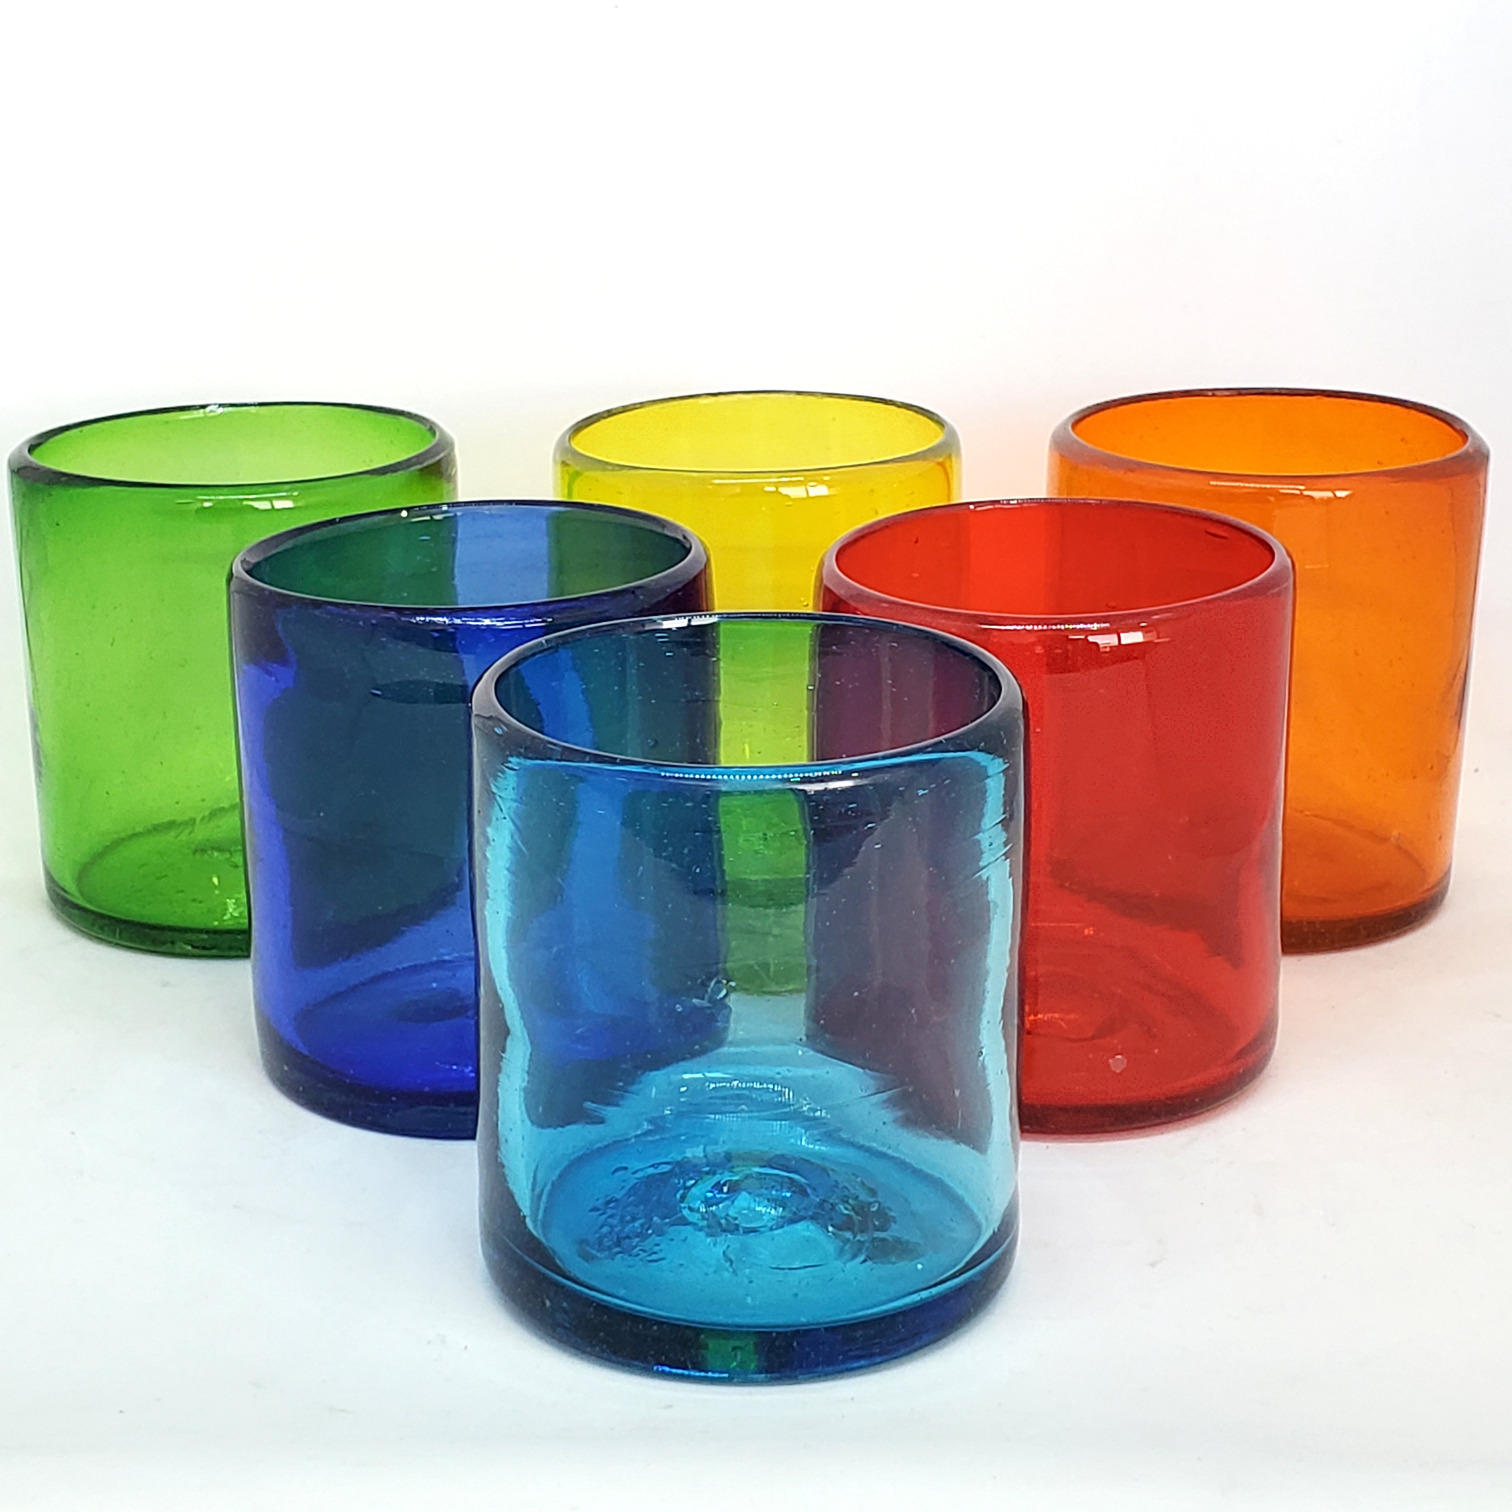 New Items / Rainbow Colored 9 oz Short Tumblers (set of 6) / Enhance your favorite drink with these colorful handcrafted glasses.